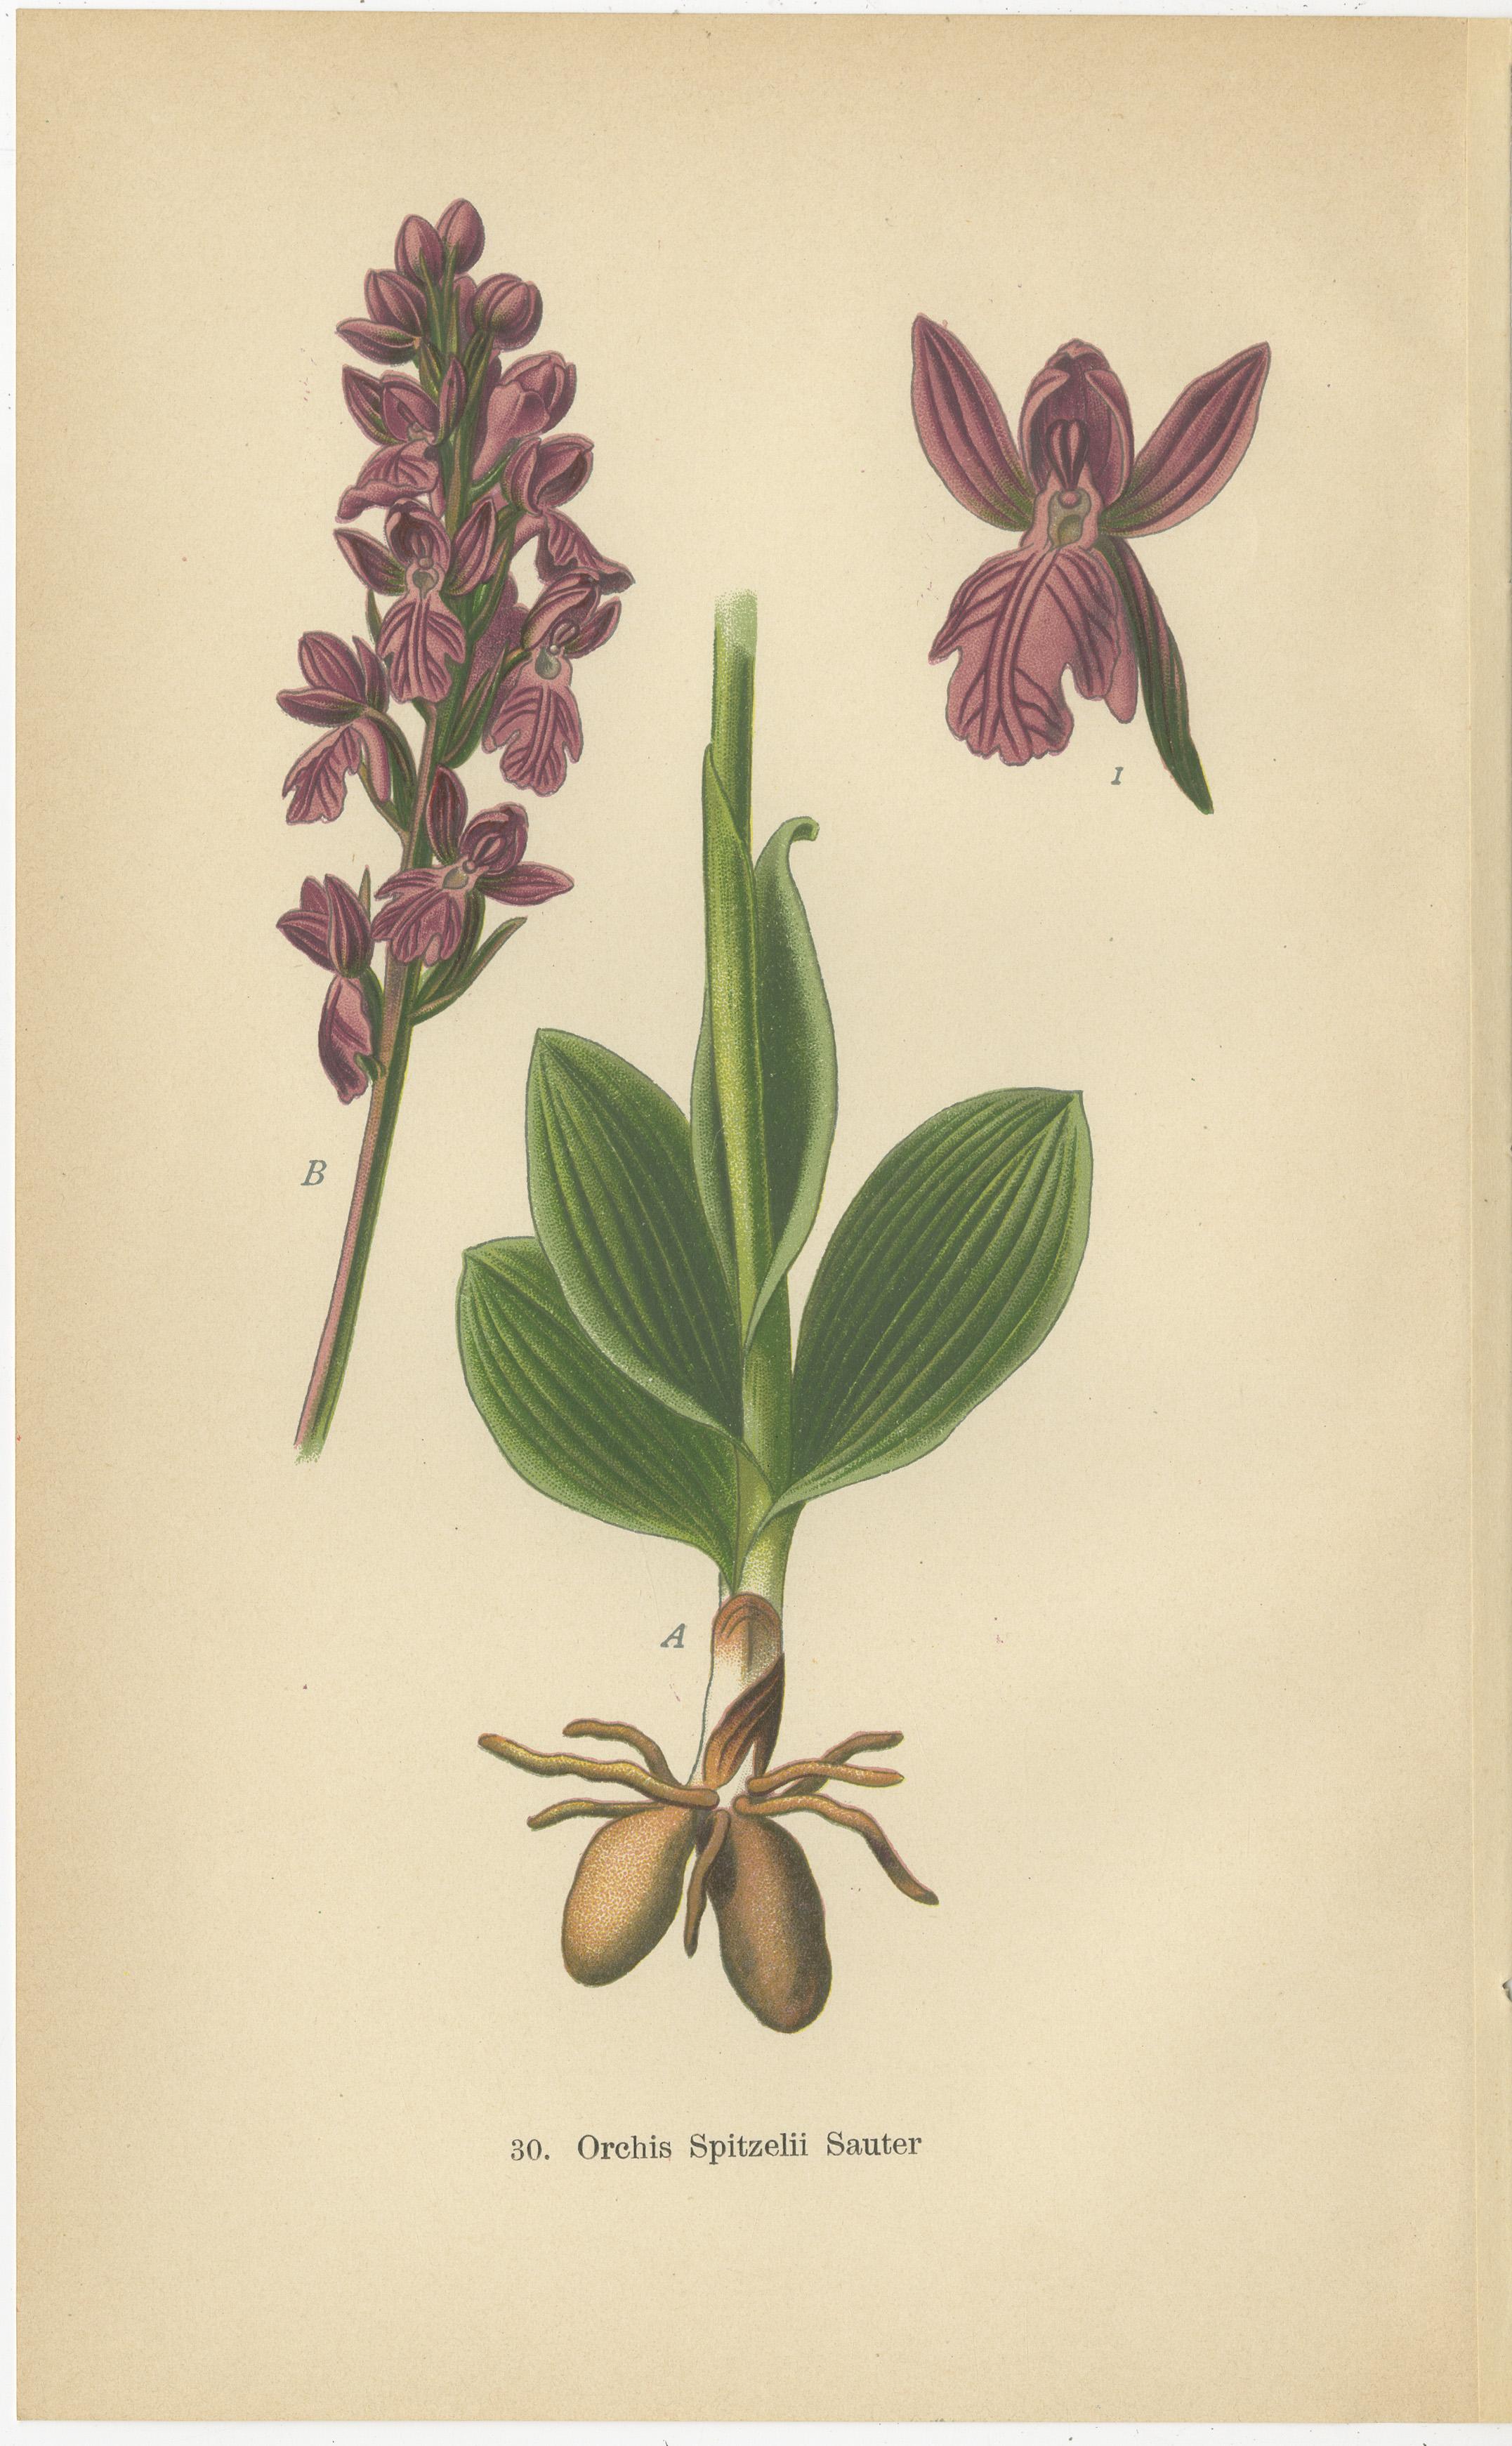 A trio of orchid illustrations, each radiating the elegance and complexity of these botanical specimens as captured in the early 20th century. 

The first image, 